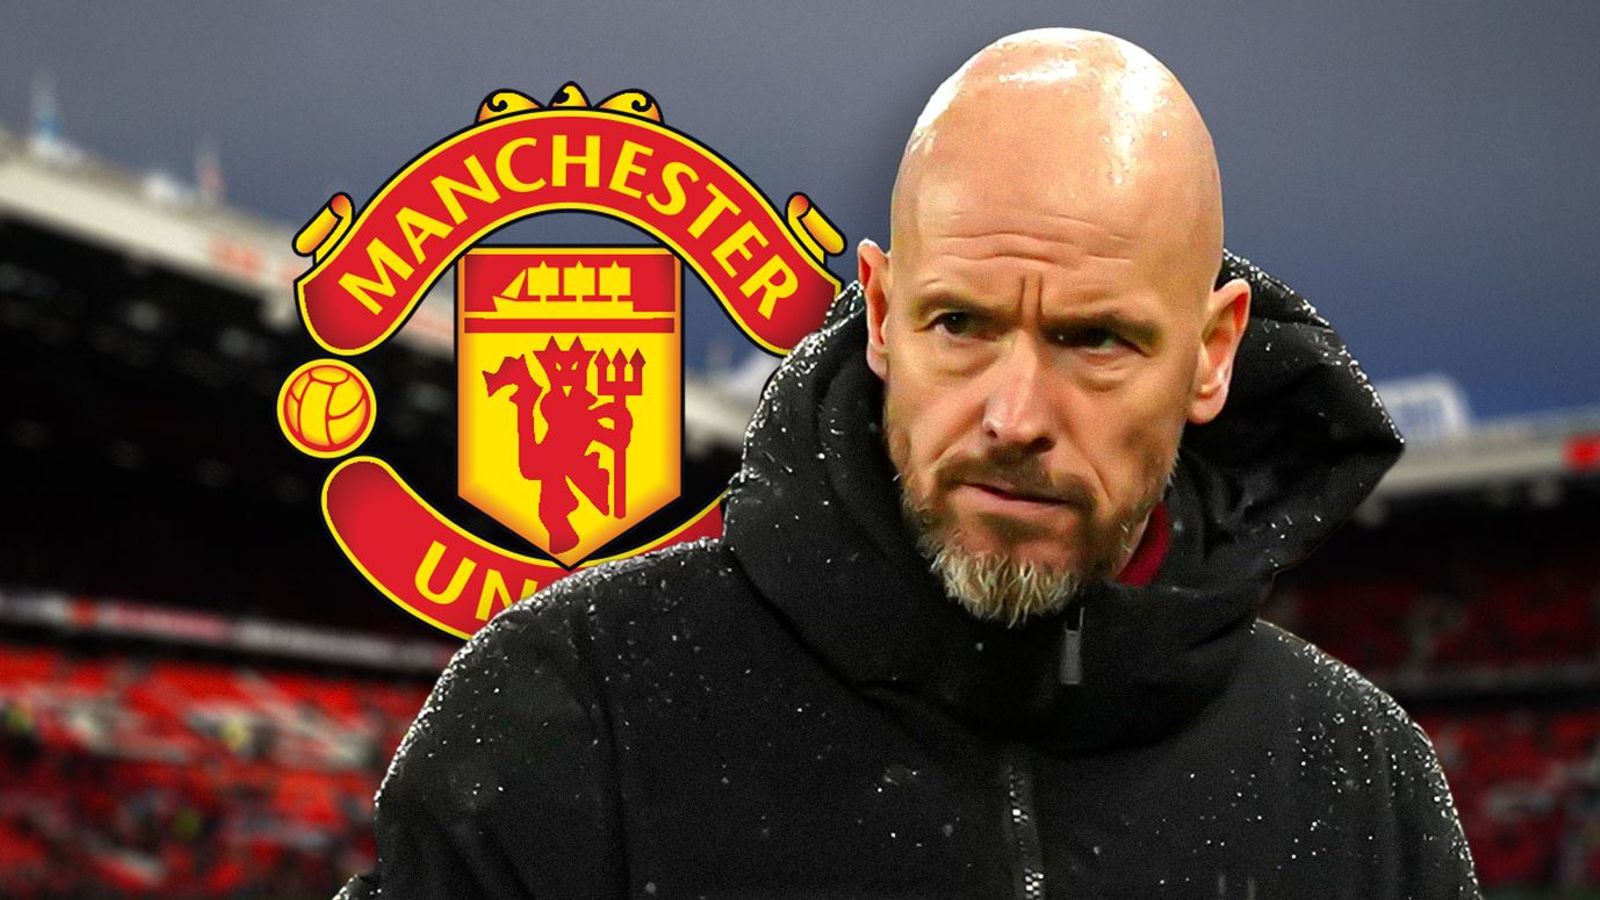 Man Utd transfers: Erik ten Hag hits back at 'untrue' reports most of his squad are up for sale in summer